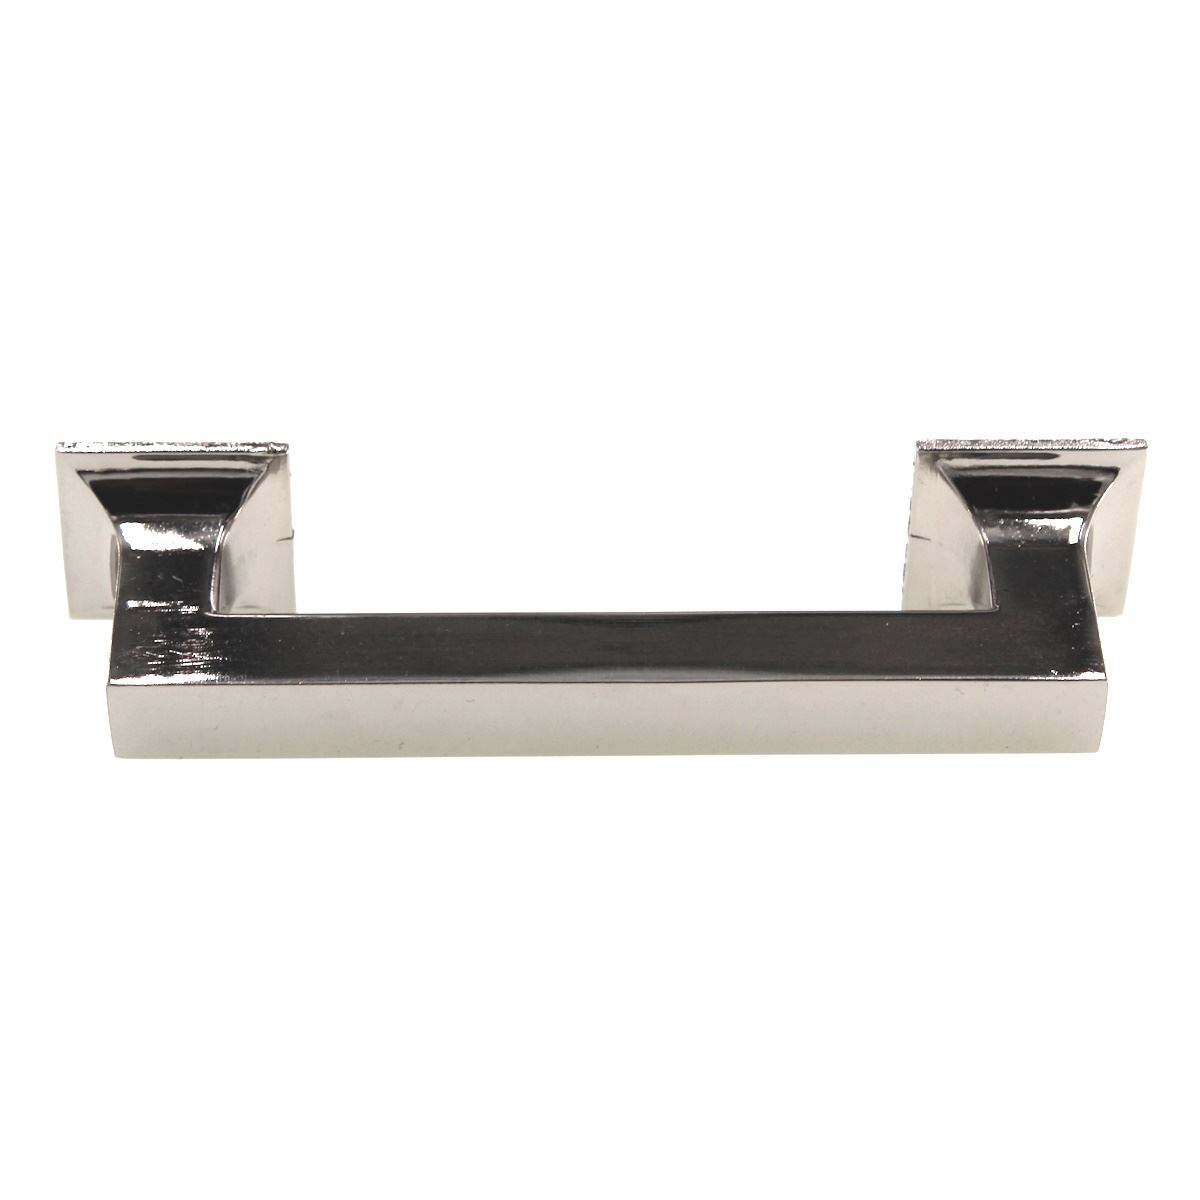 Hickory Hardware Studio 3 3/4 (96mm) Ctr Square Pull Polished Nickel